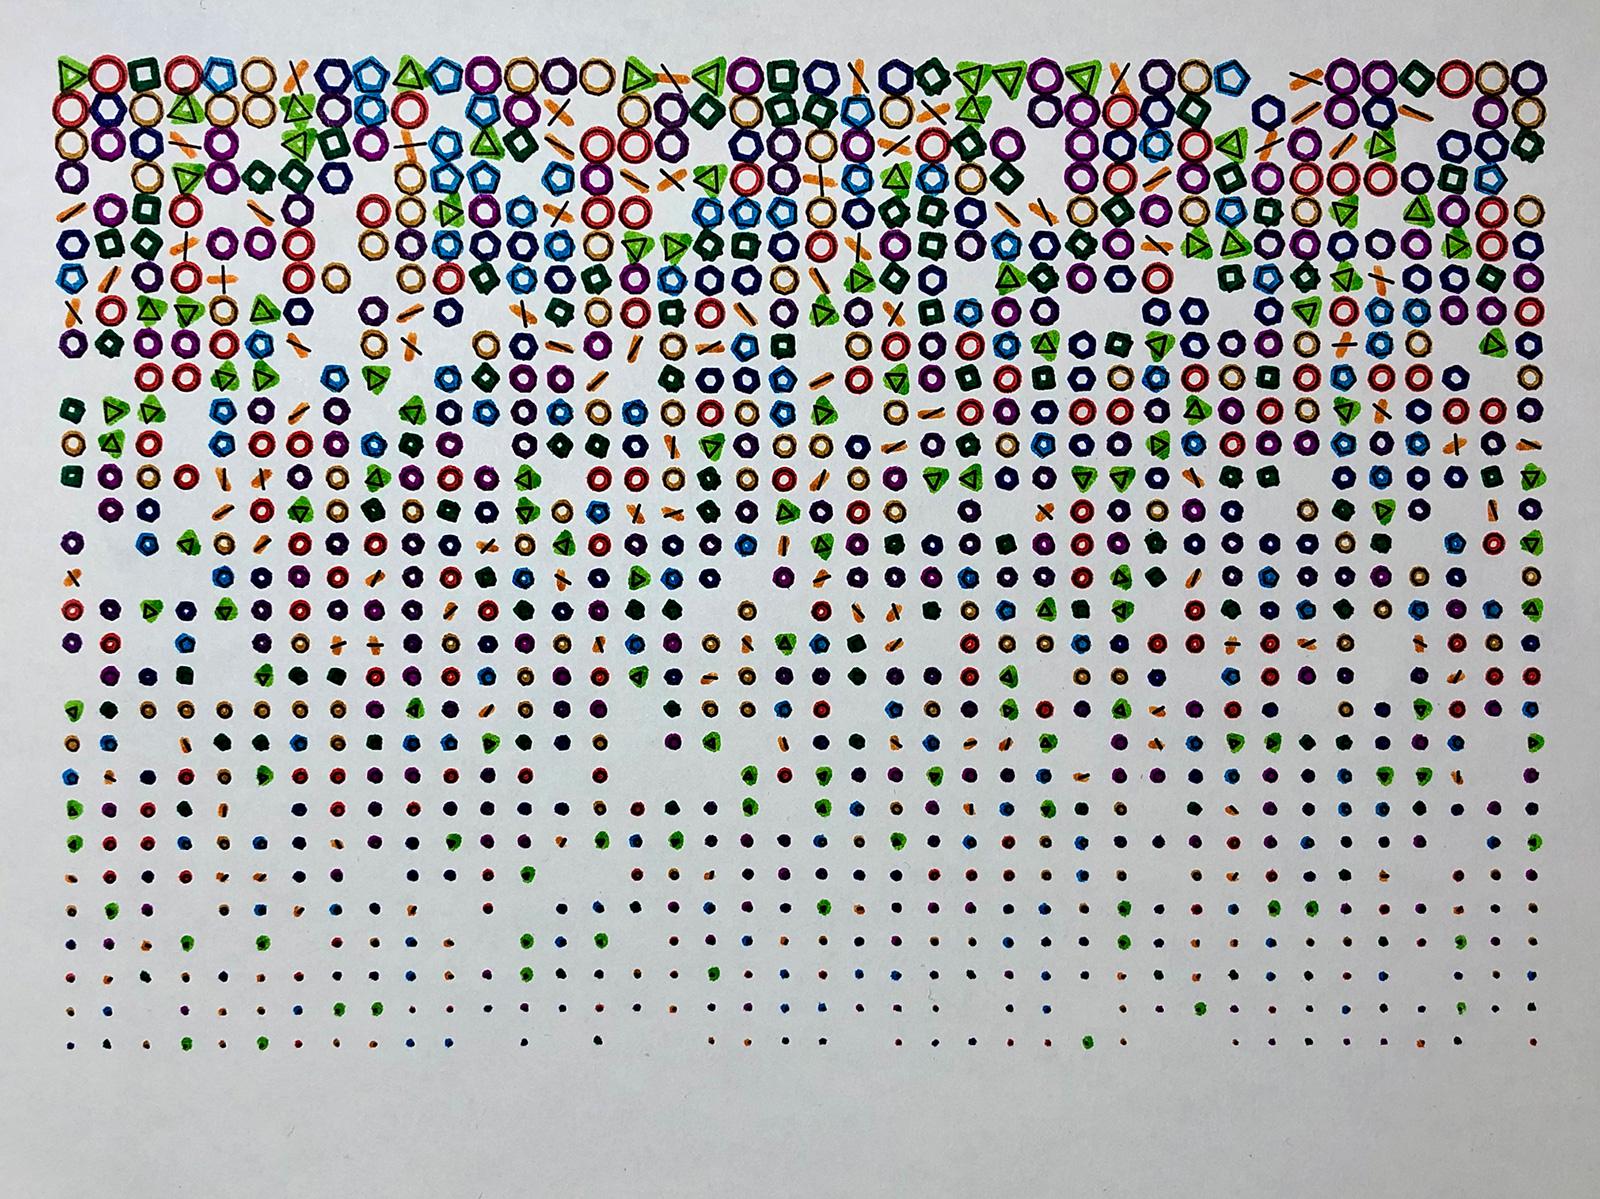 A grid of seemingly randomly-placed and rotated shapes, with numbers of sides from circles to nonagons. Each shape is a thin black line on top of the same shape drawn in a bright colour. Each row of shapes gradually gets smaller moving down the page